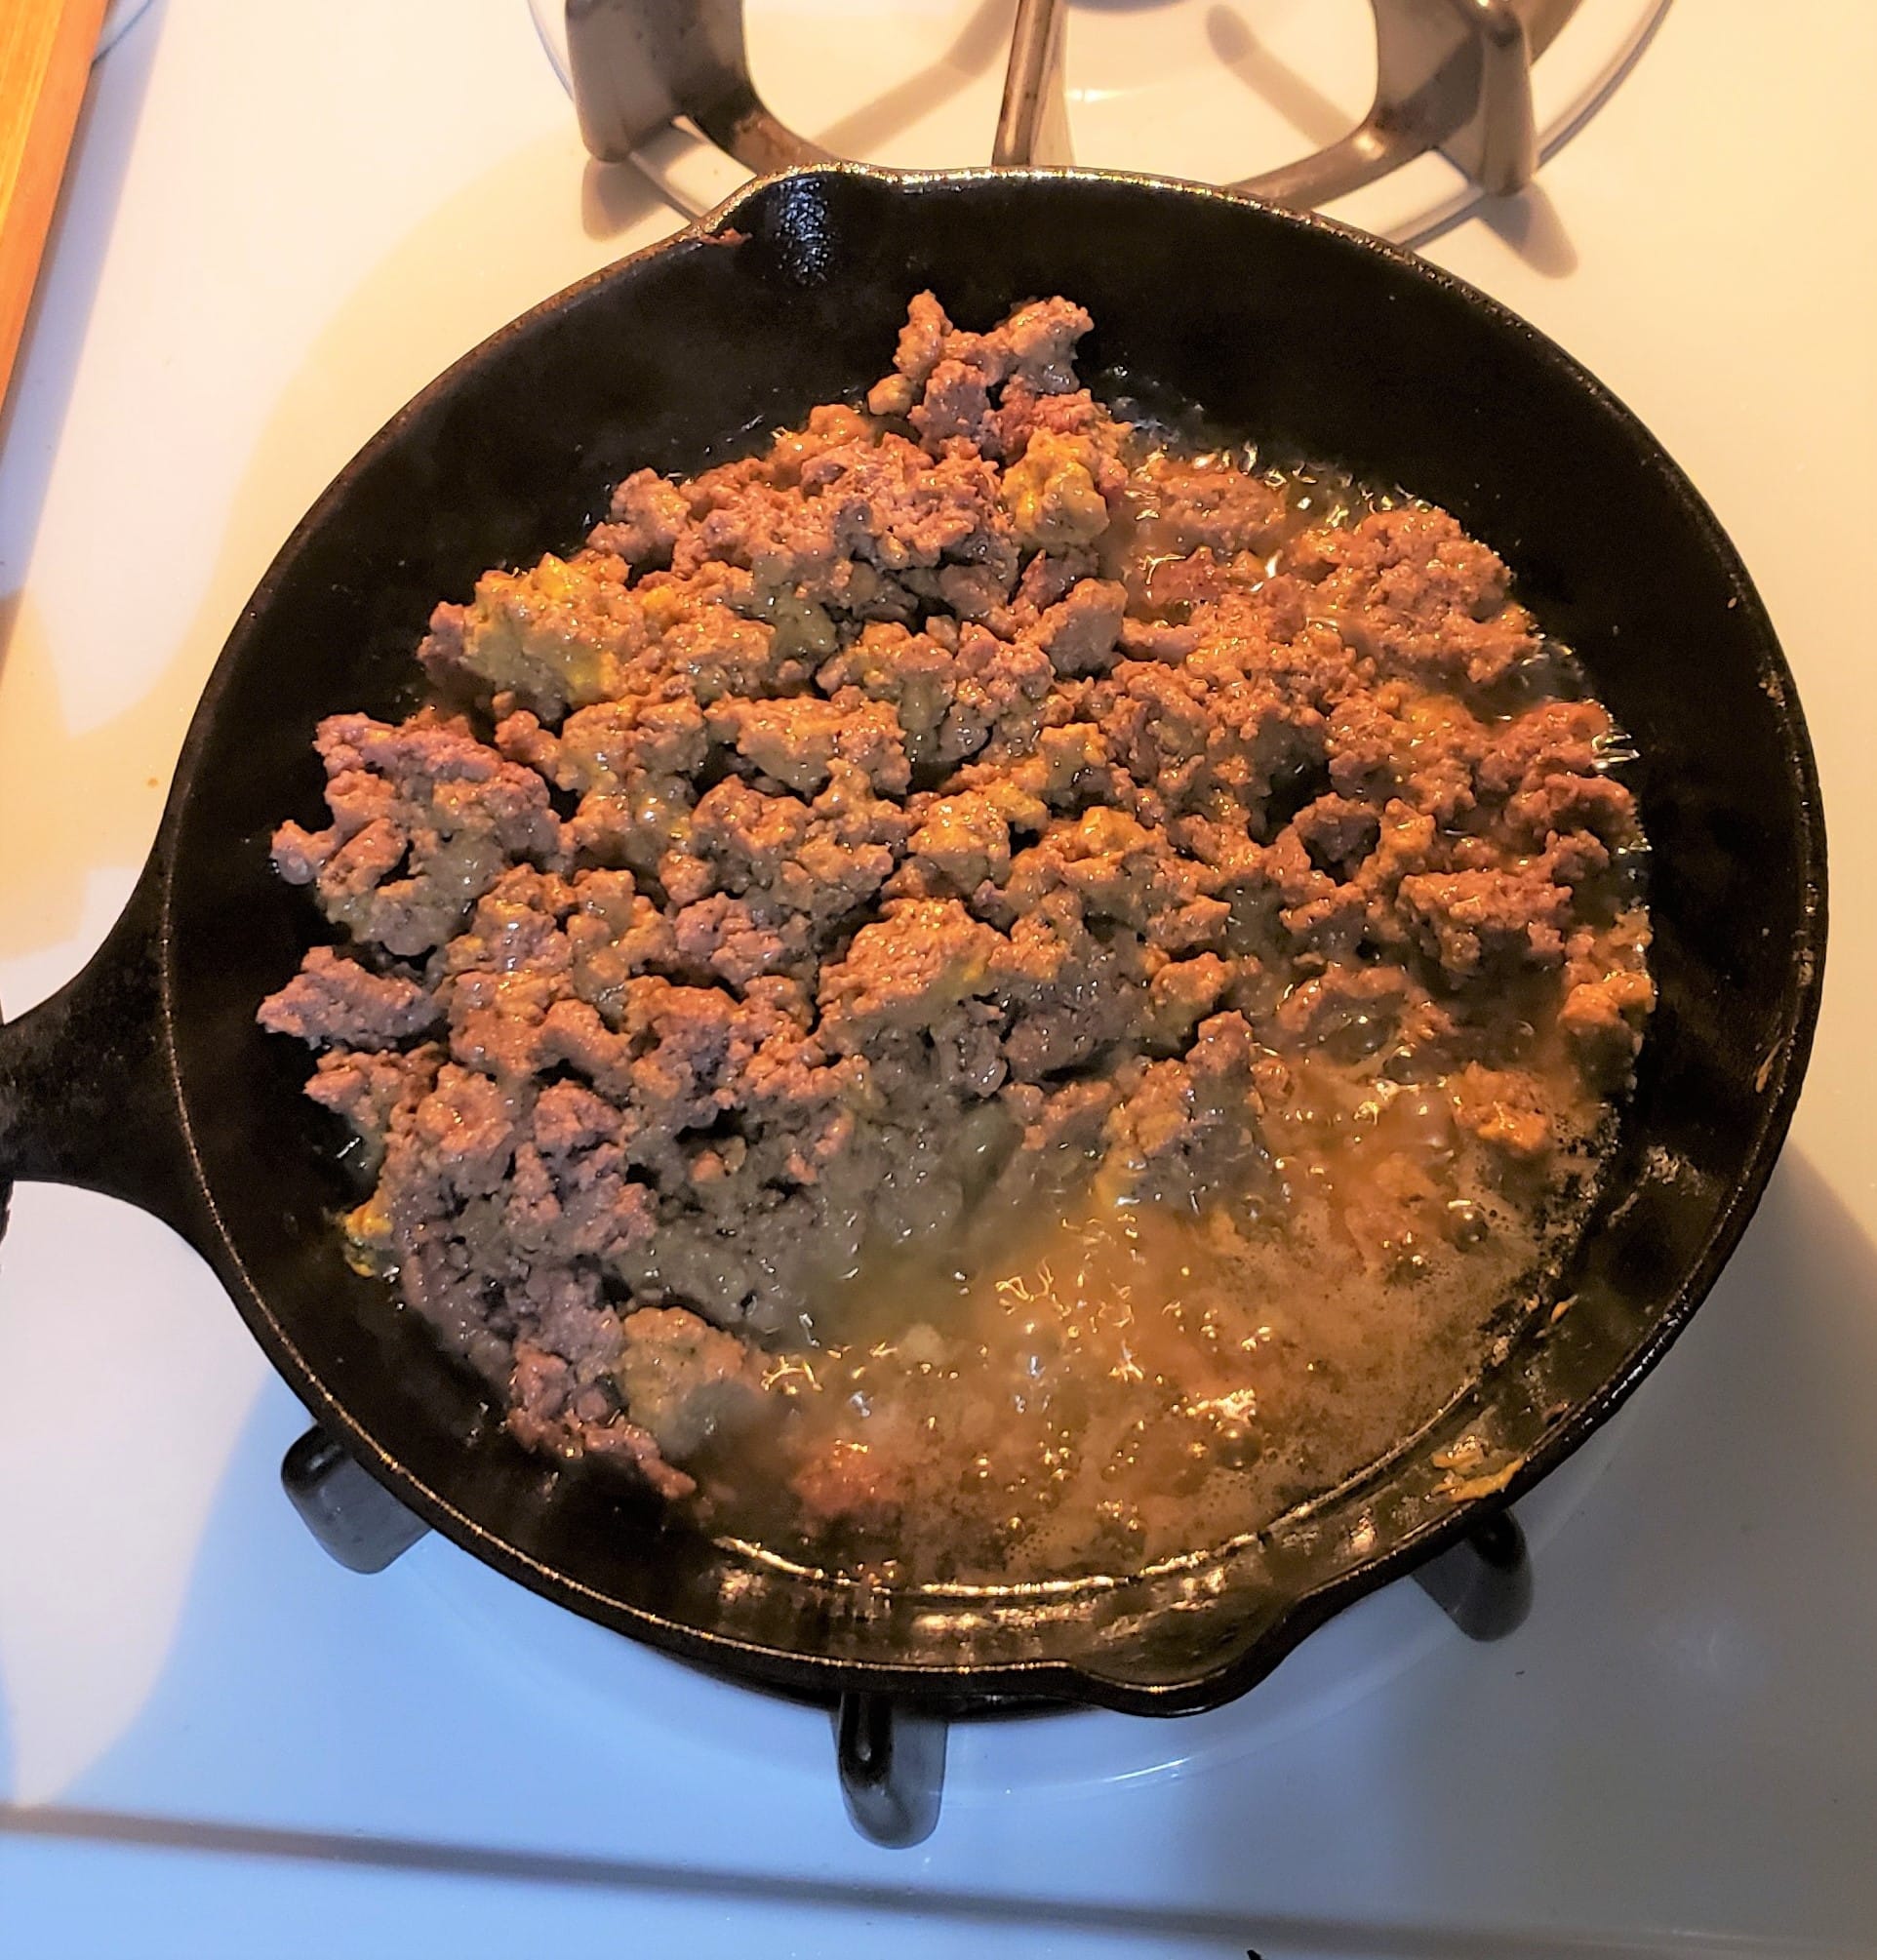 Cast iron skillet with ground beef showing all the grease